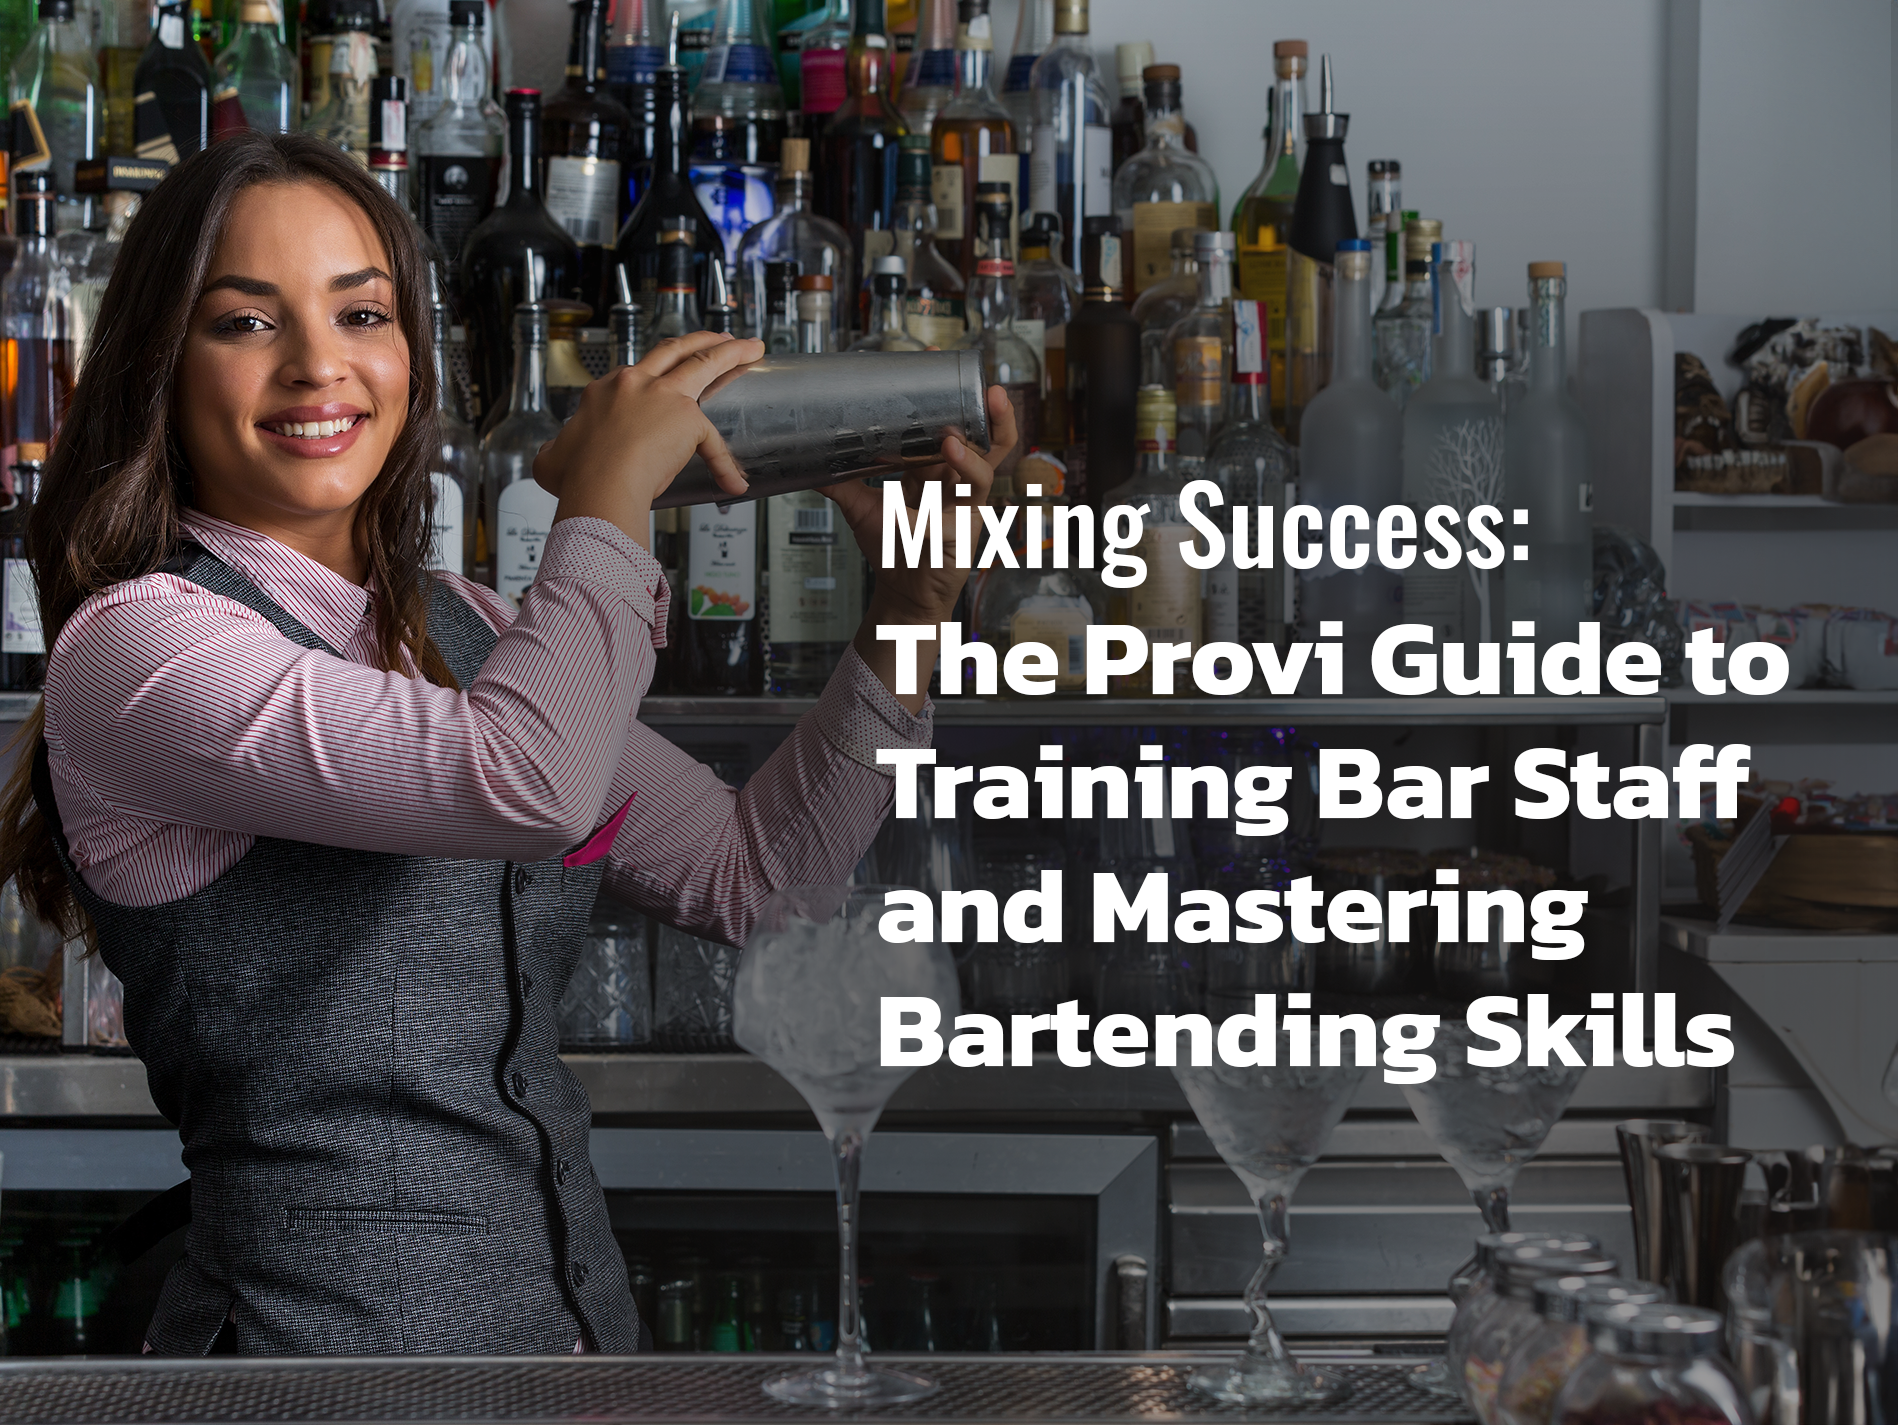 Mixing success: the Provi guide to training bar staff and mastering bartending skills